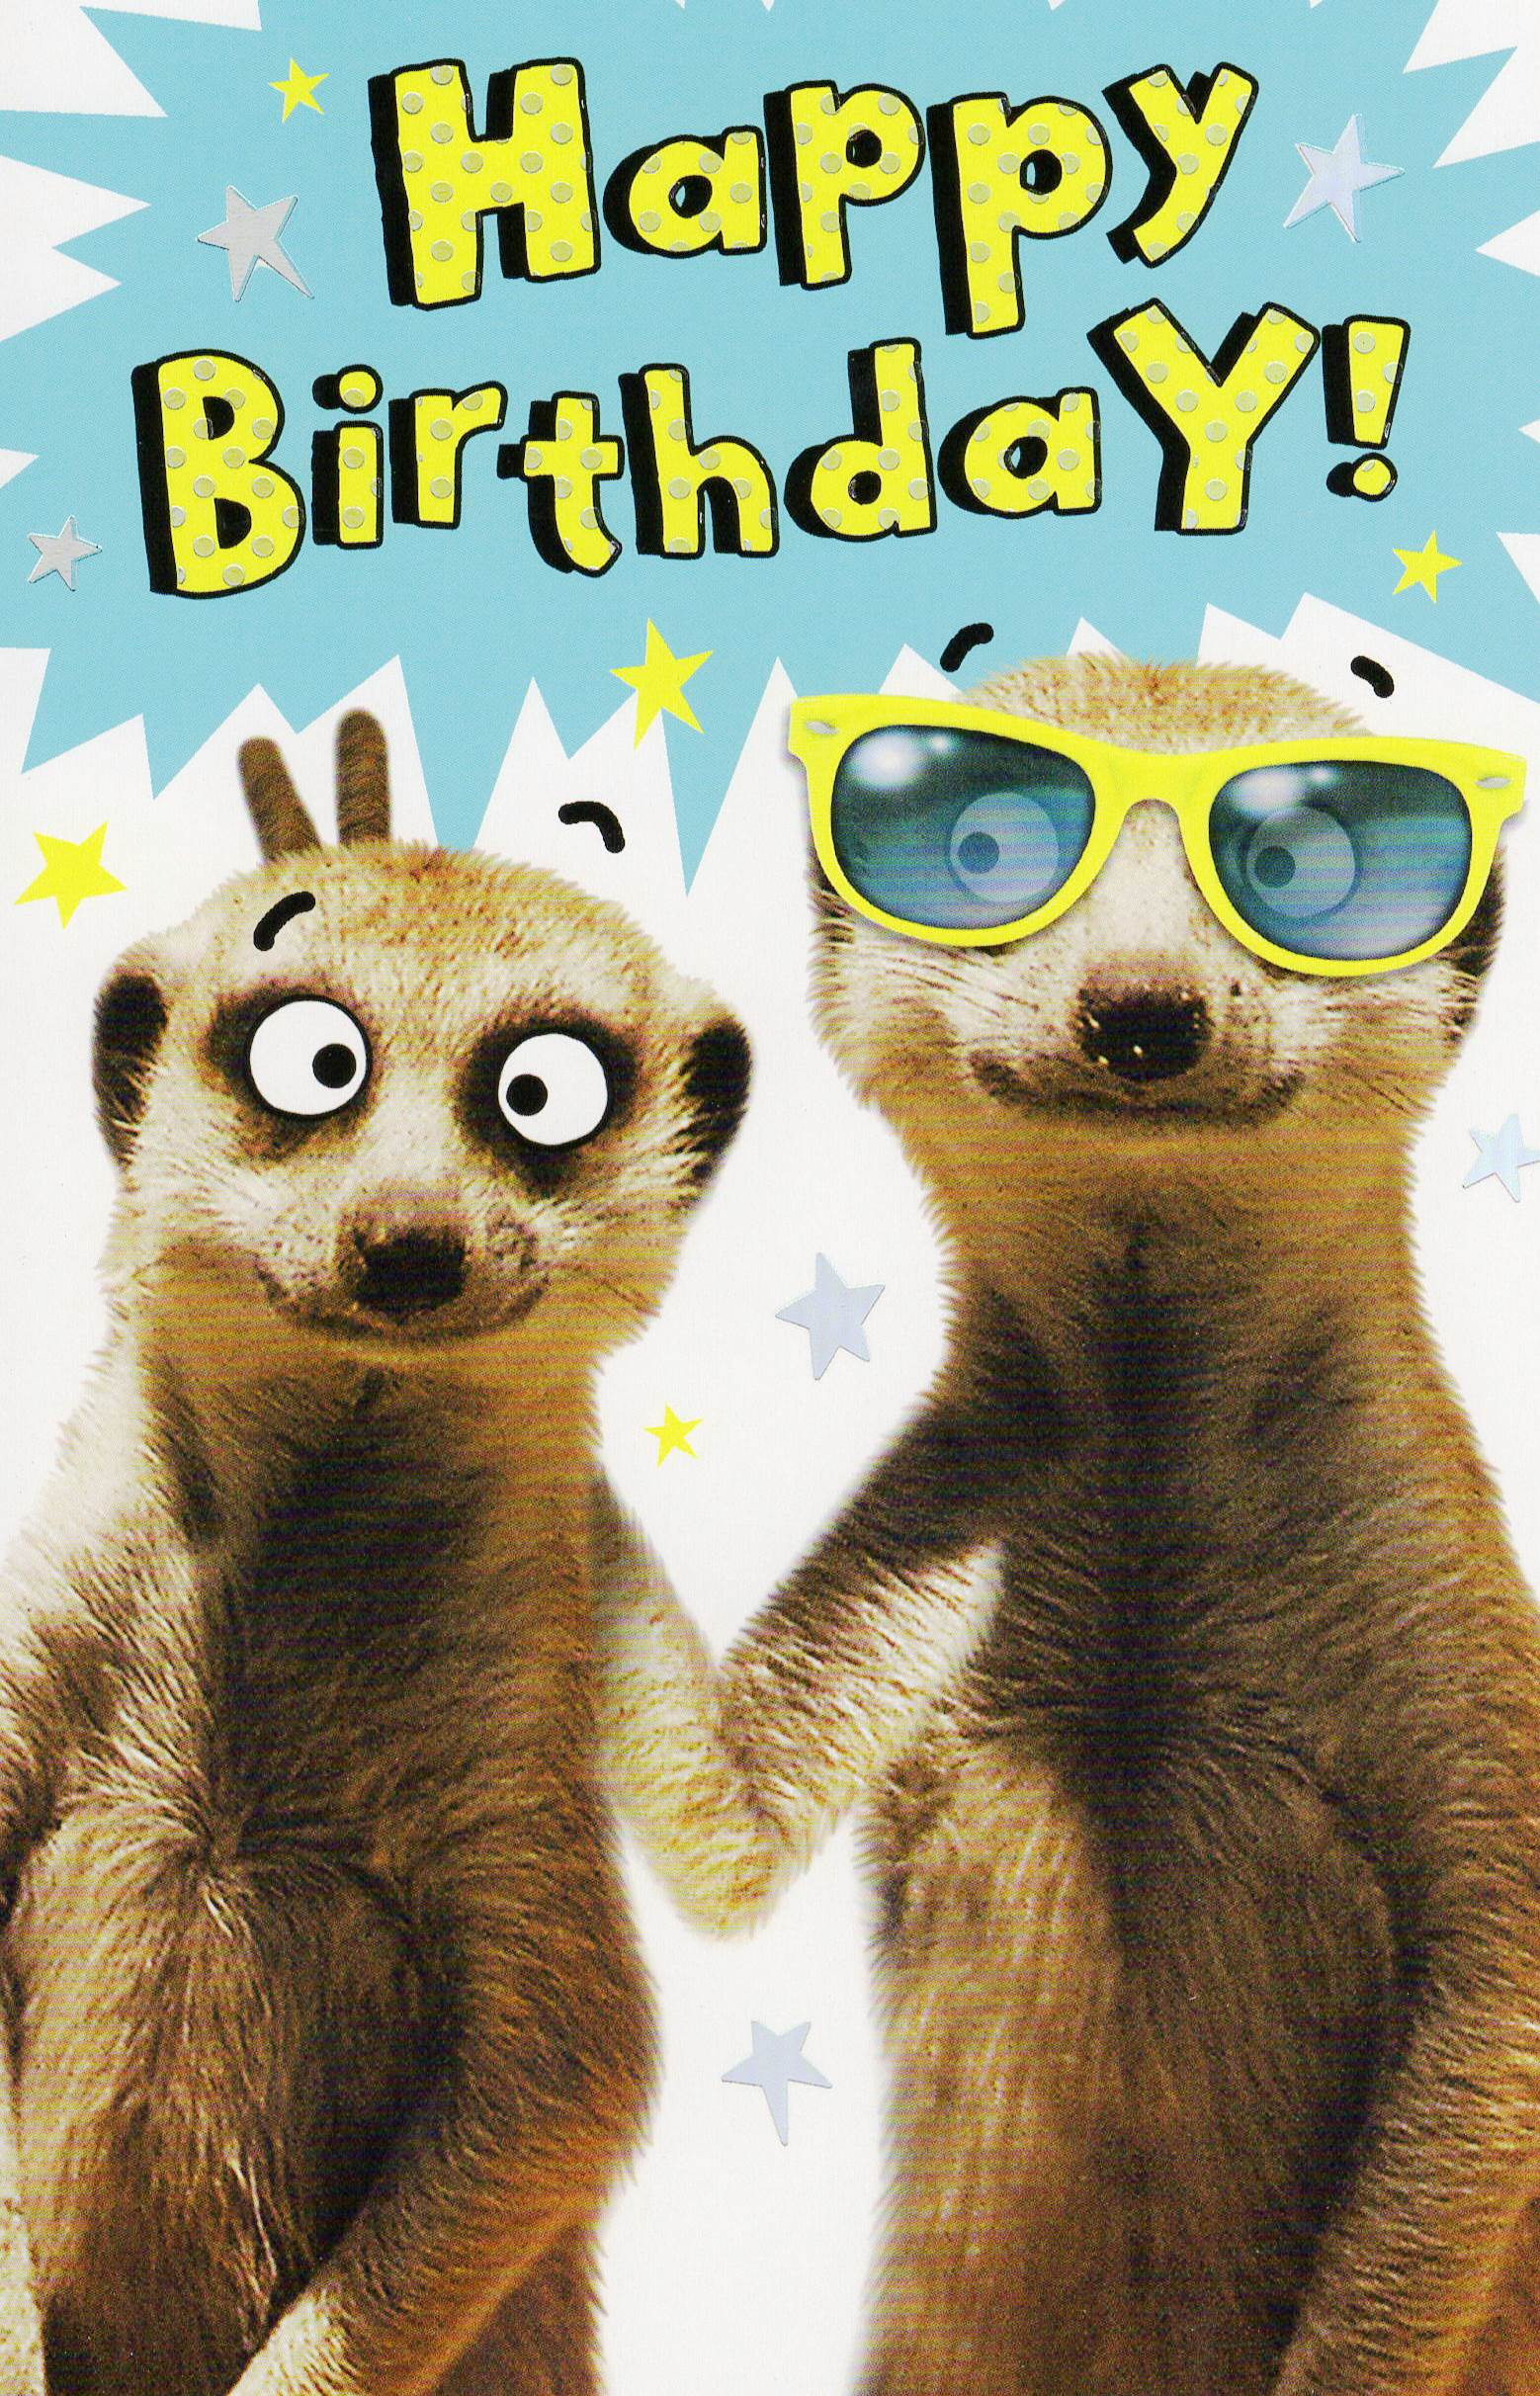 Happy Birthday Cards For Her Funny
 Funny Meerkat Happy Birthday Card Humour Greeting Cards